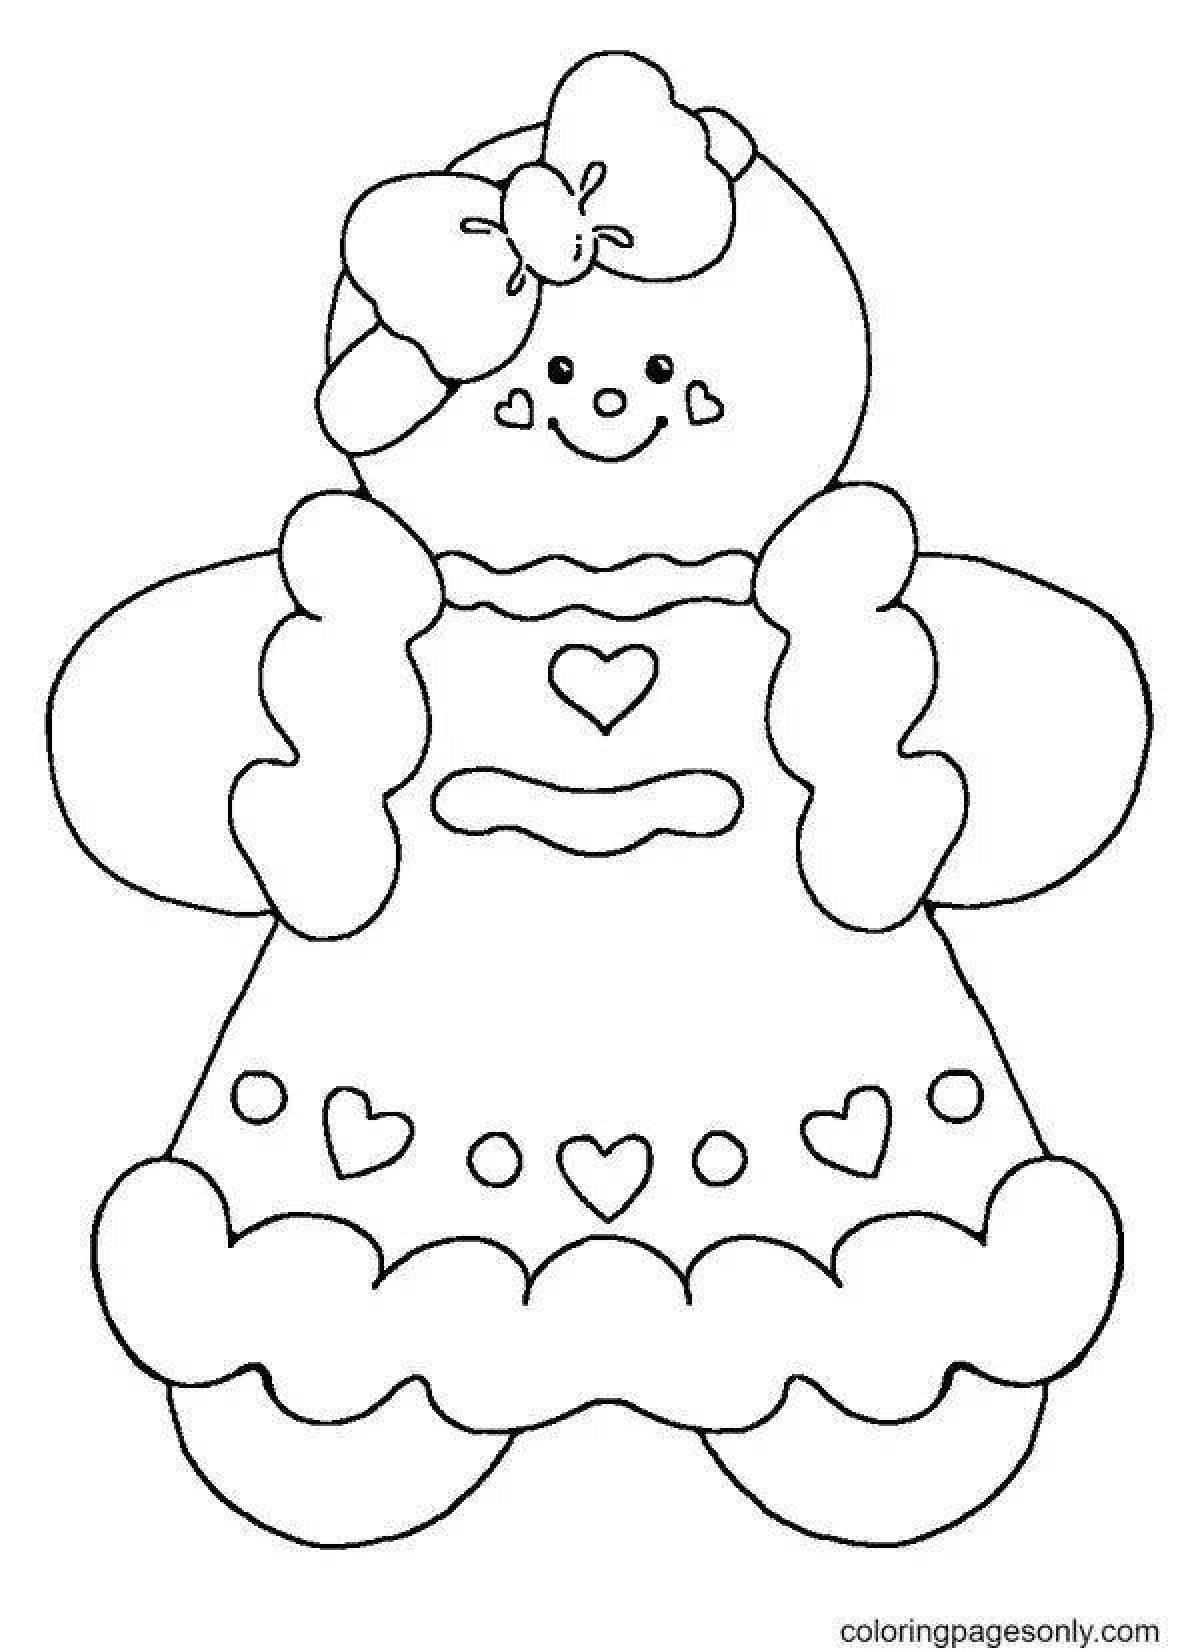 Fancy gingerbread coloring pages for kids